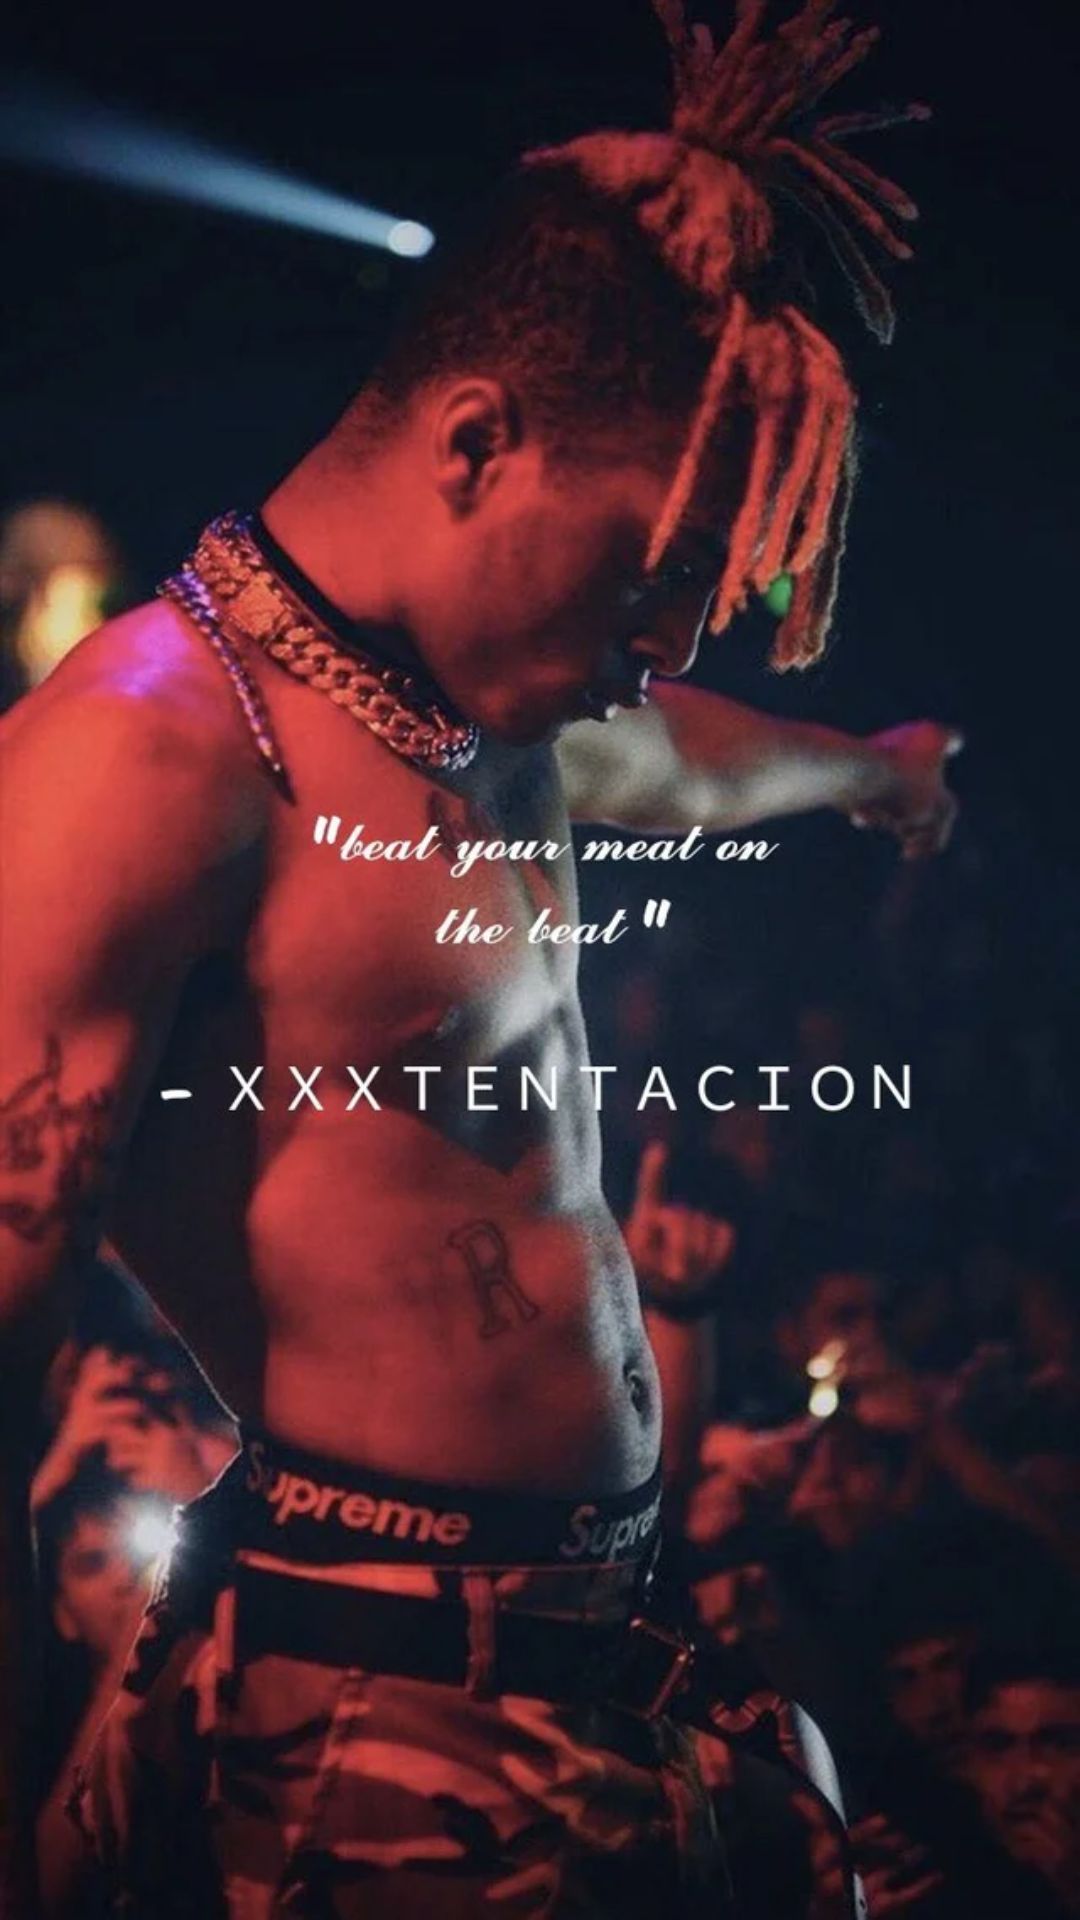 A man with dreads and tattoos on his chest - XXXTentacion